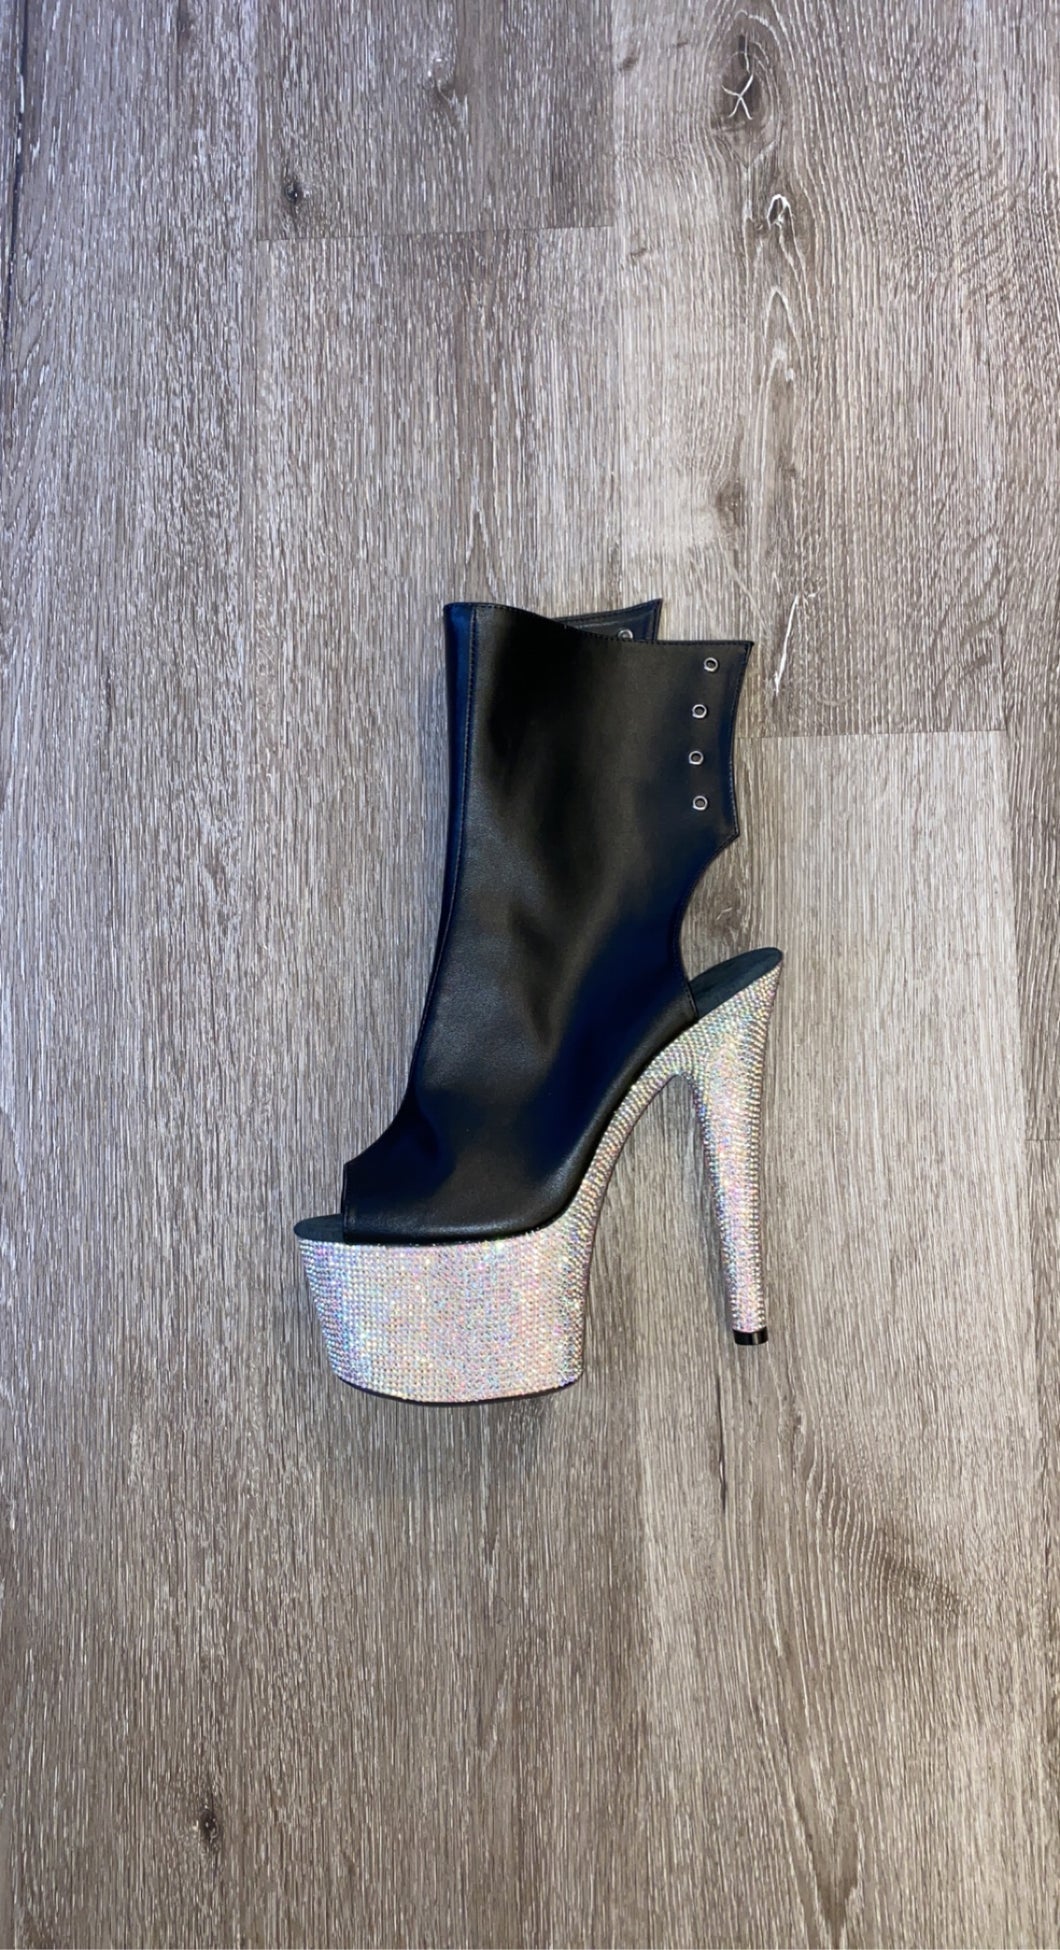 BLACK ANKLE BOOTS WITH RHINESTONE HEELS